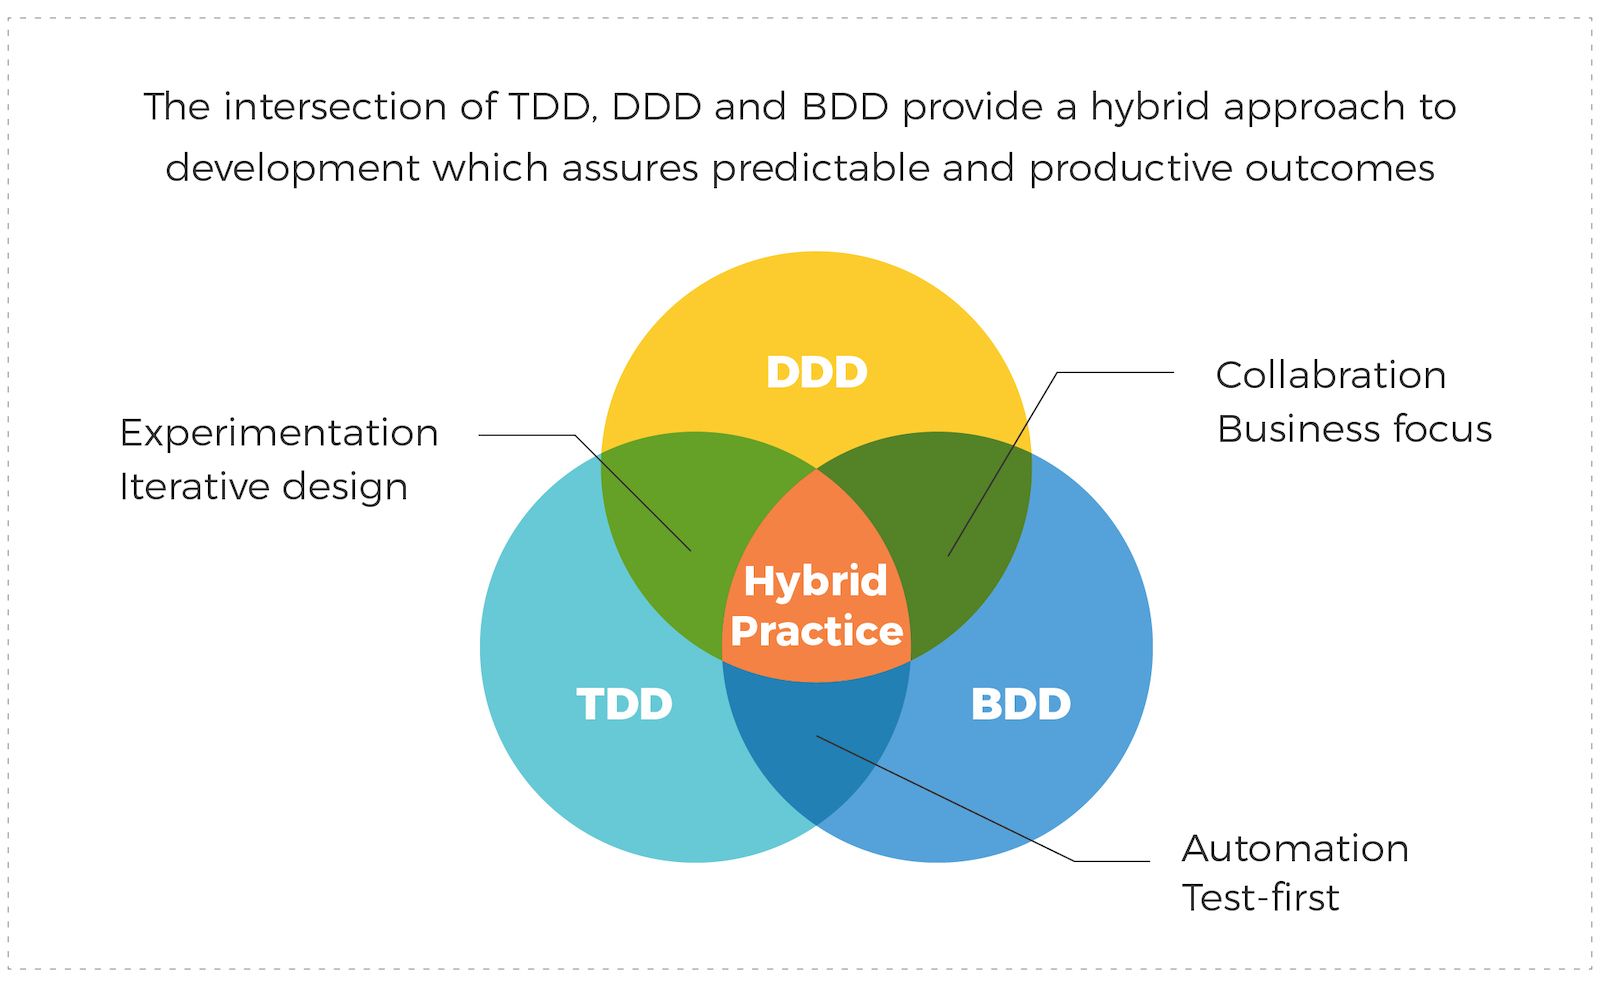 the intersection of TDD,DDD and BDD provide a hybrid approach to development which assures predictable and productive outcomes